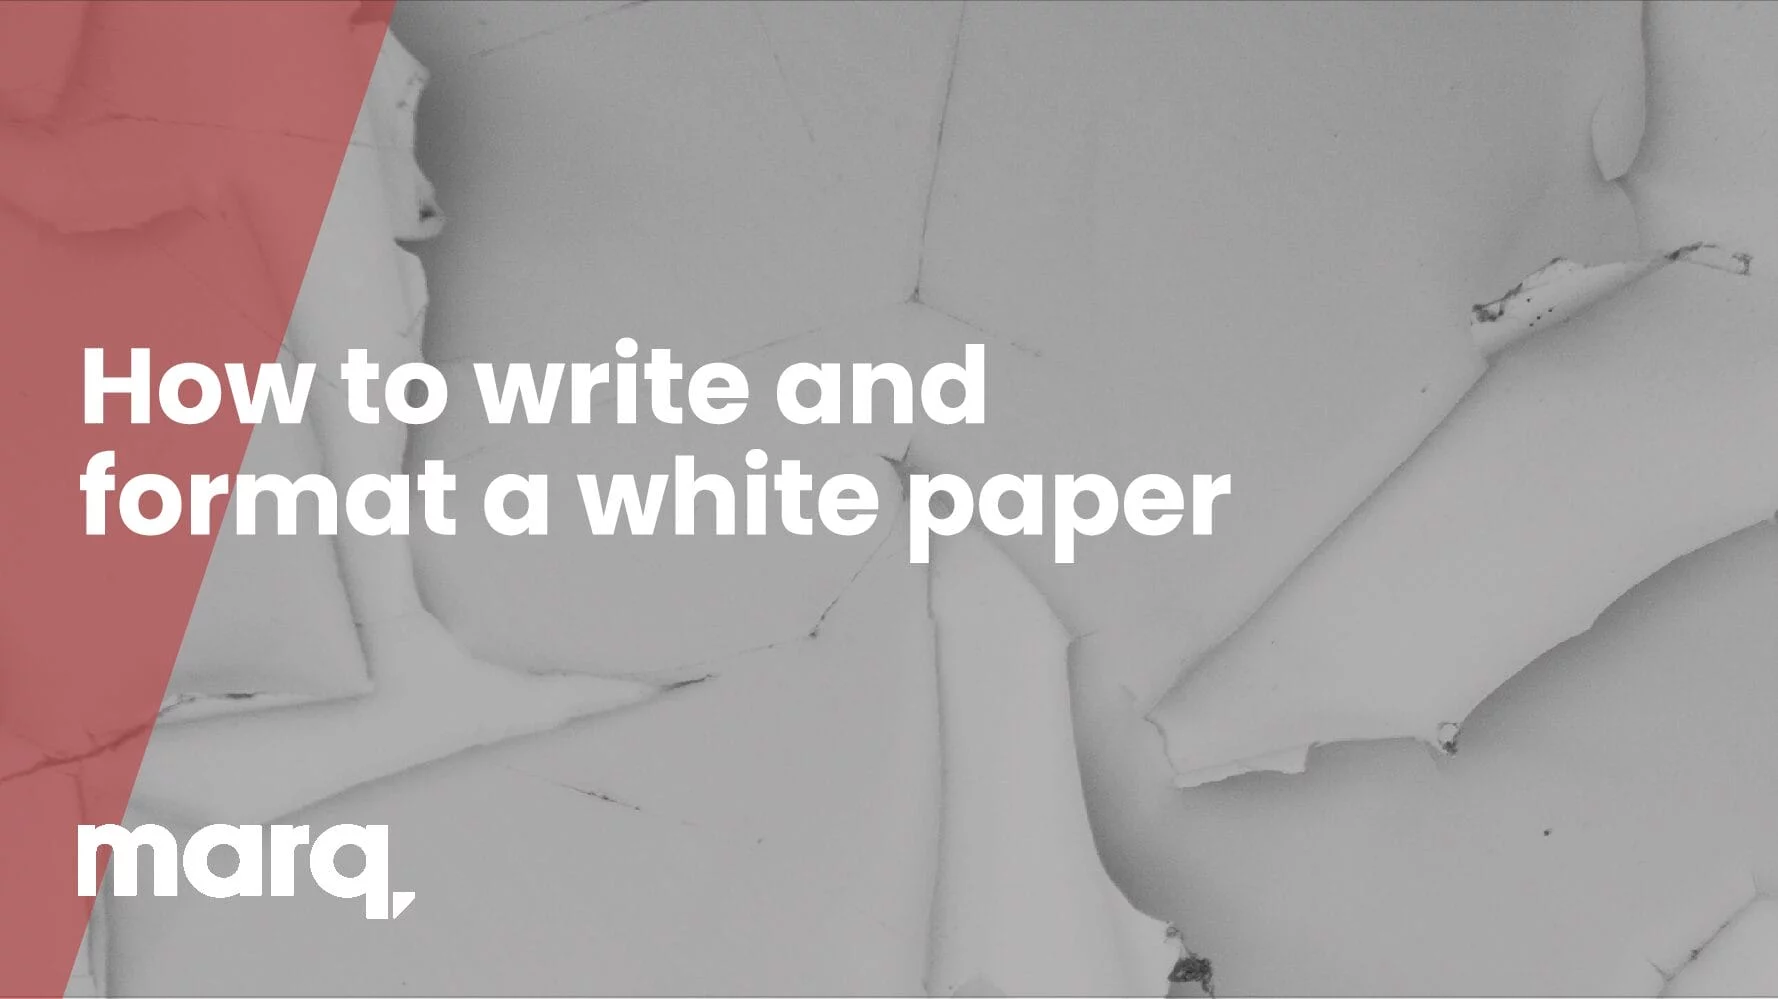 How to write and format a white paper